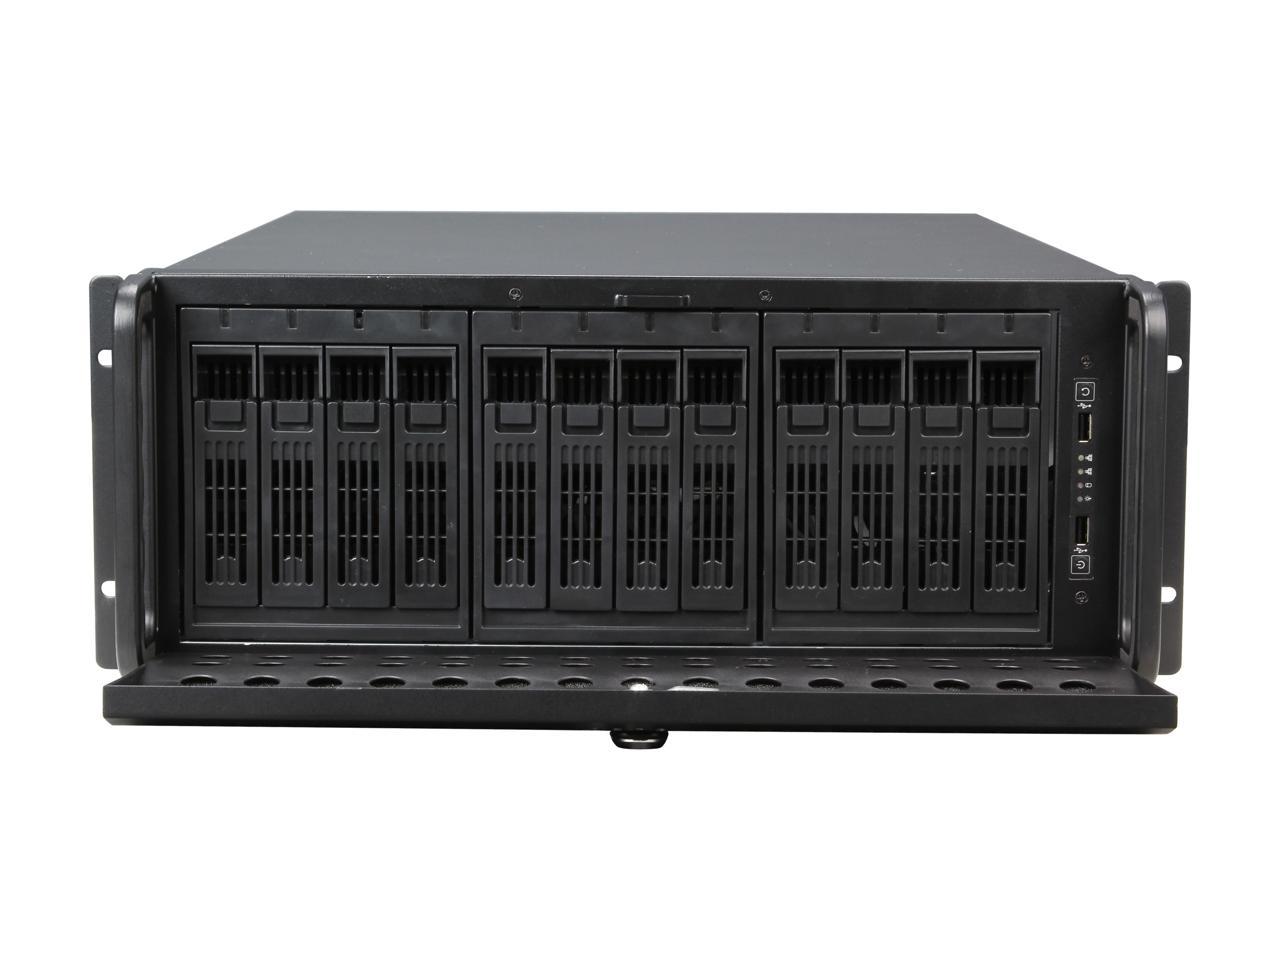 Rosewill Rsv-L4412 - 4U Rackmount Server Case Or Chassis, 12 Sata / Sas Hot-Swap Drives, 5 Cooling Fans Included